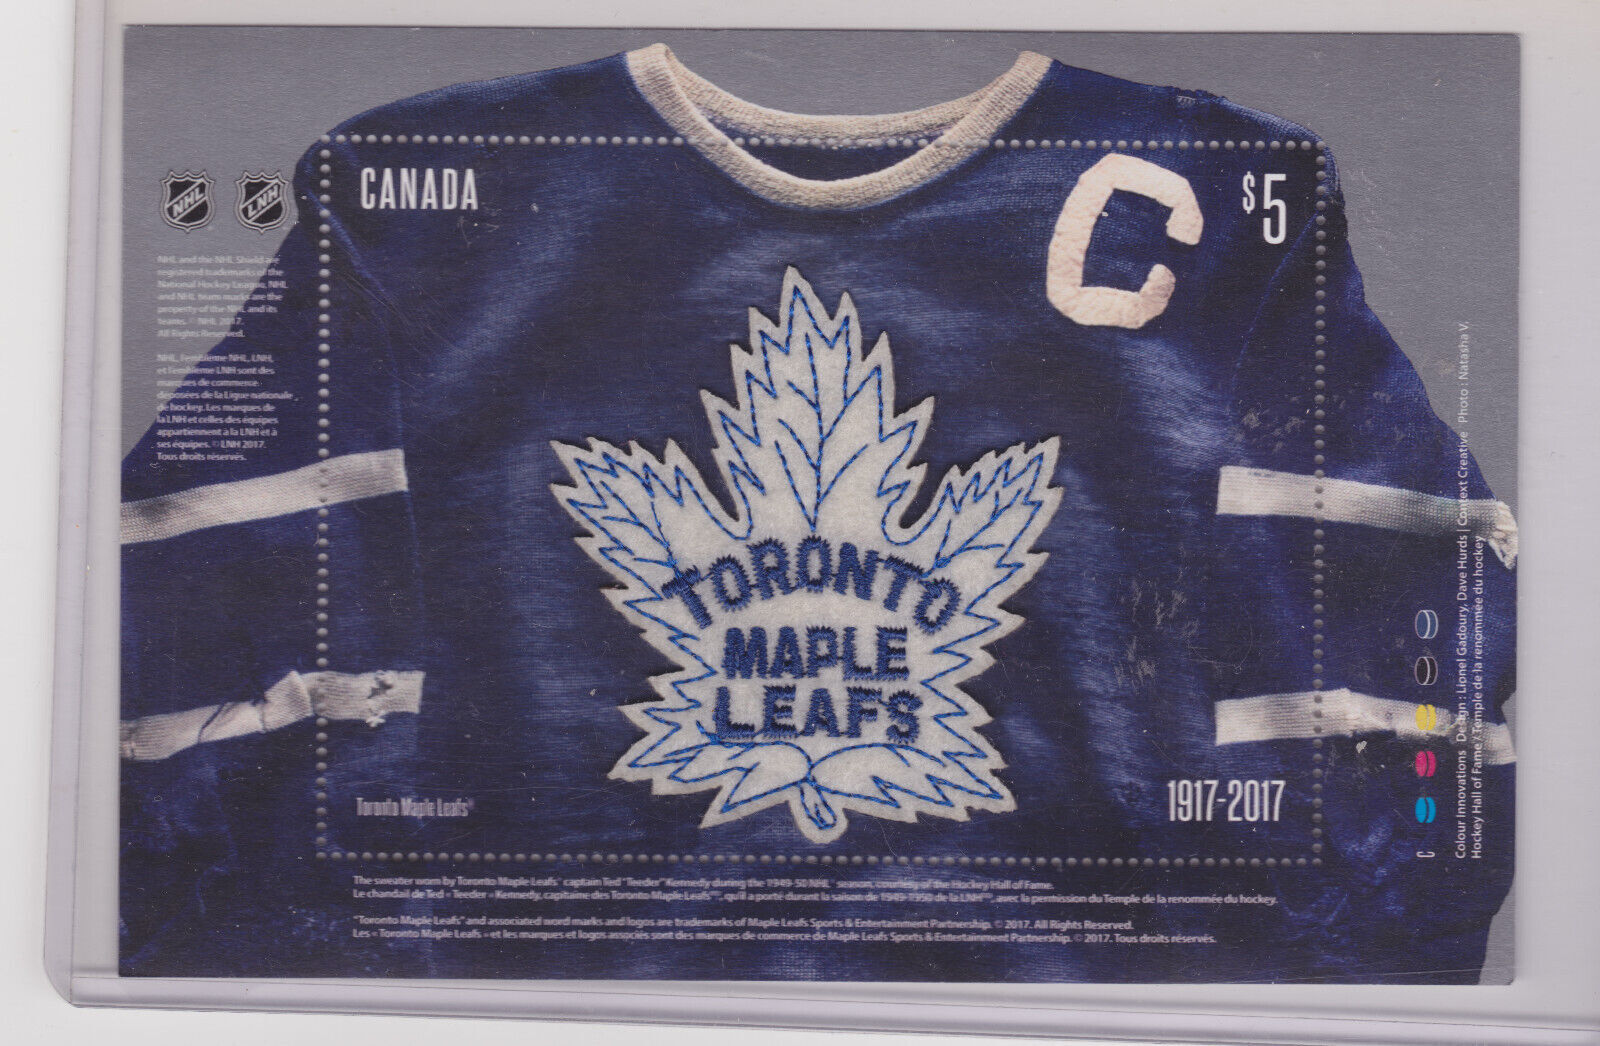 Maple Leafs Hall of Fame jerseys